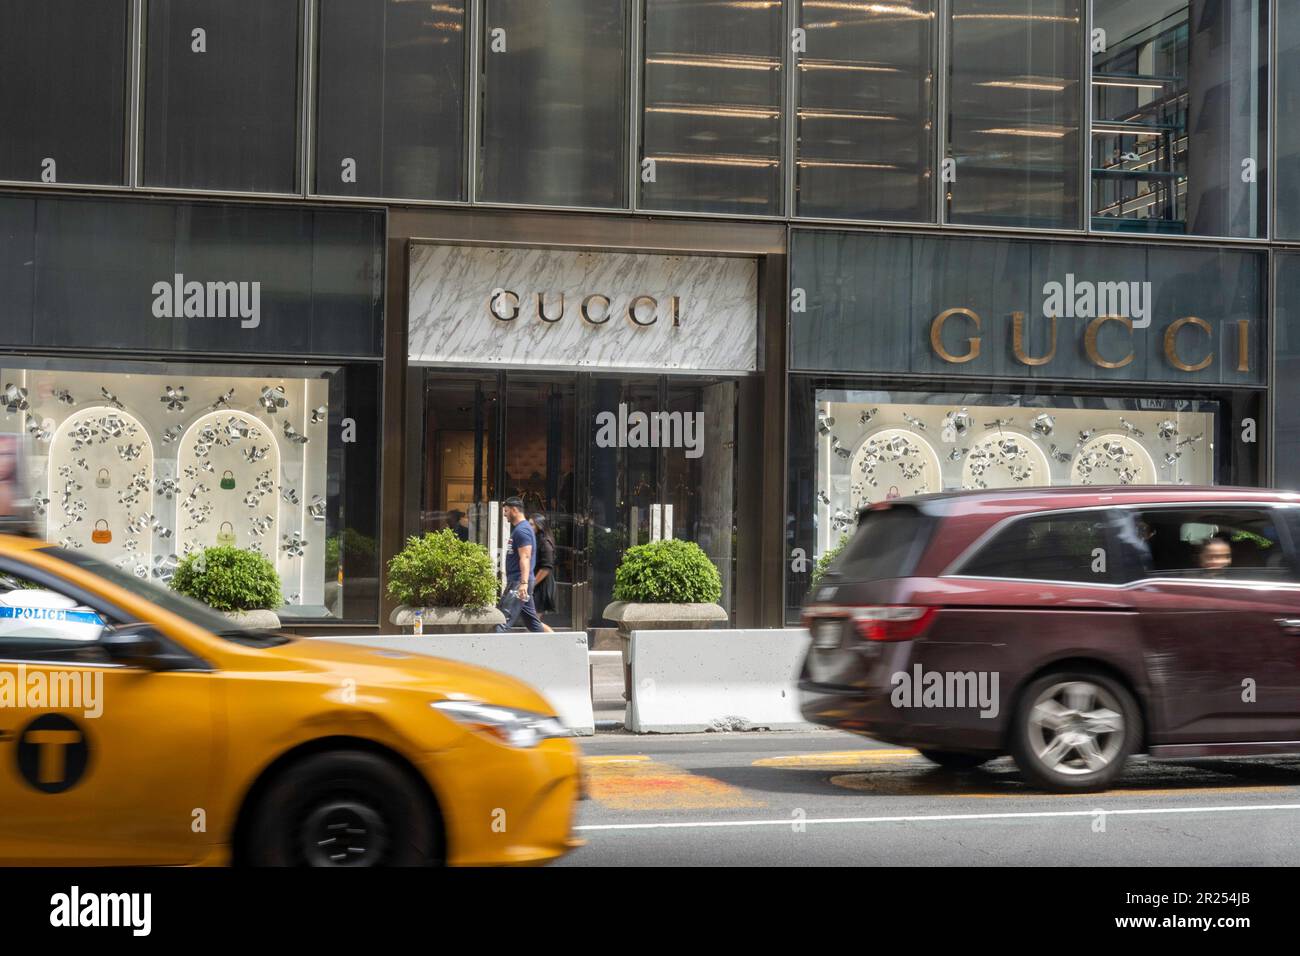 The high end, fashion store, gucci, is located in Trump Tower on fifth Avenue in midtown Manhattan, 2023, USA, New York City Stock Photo